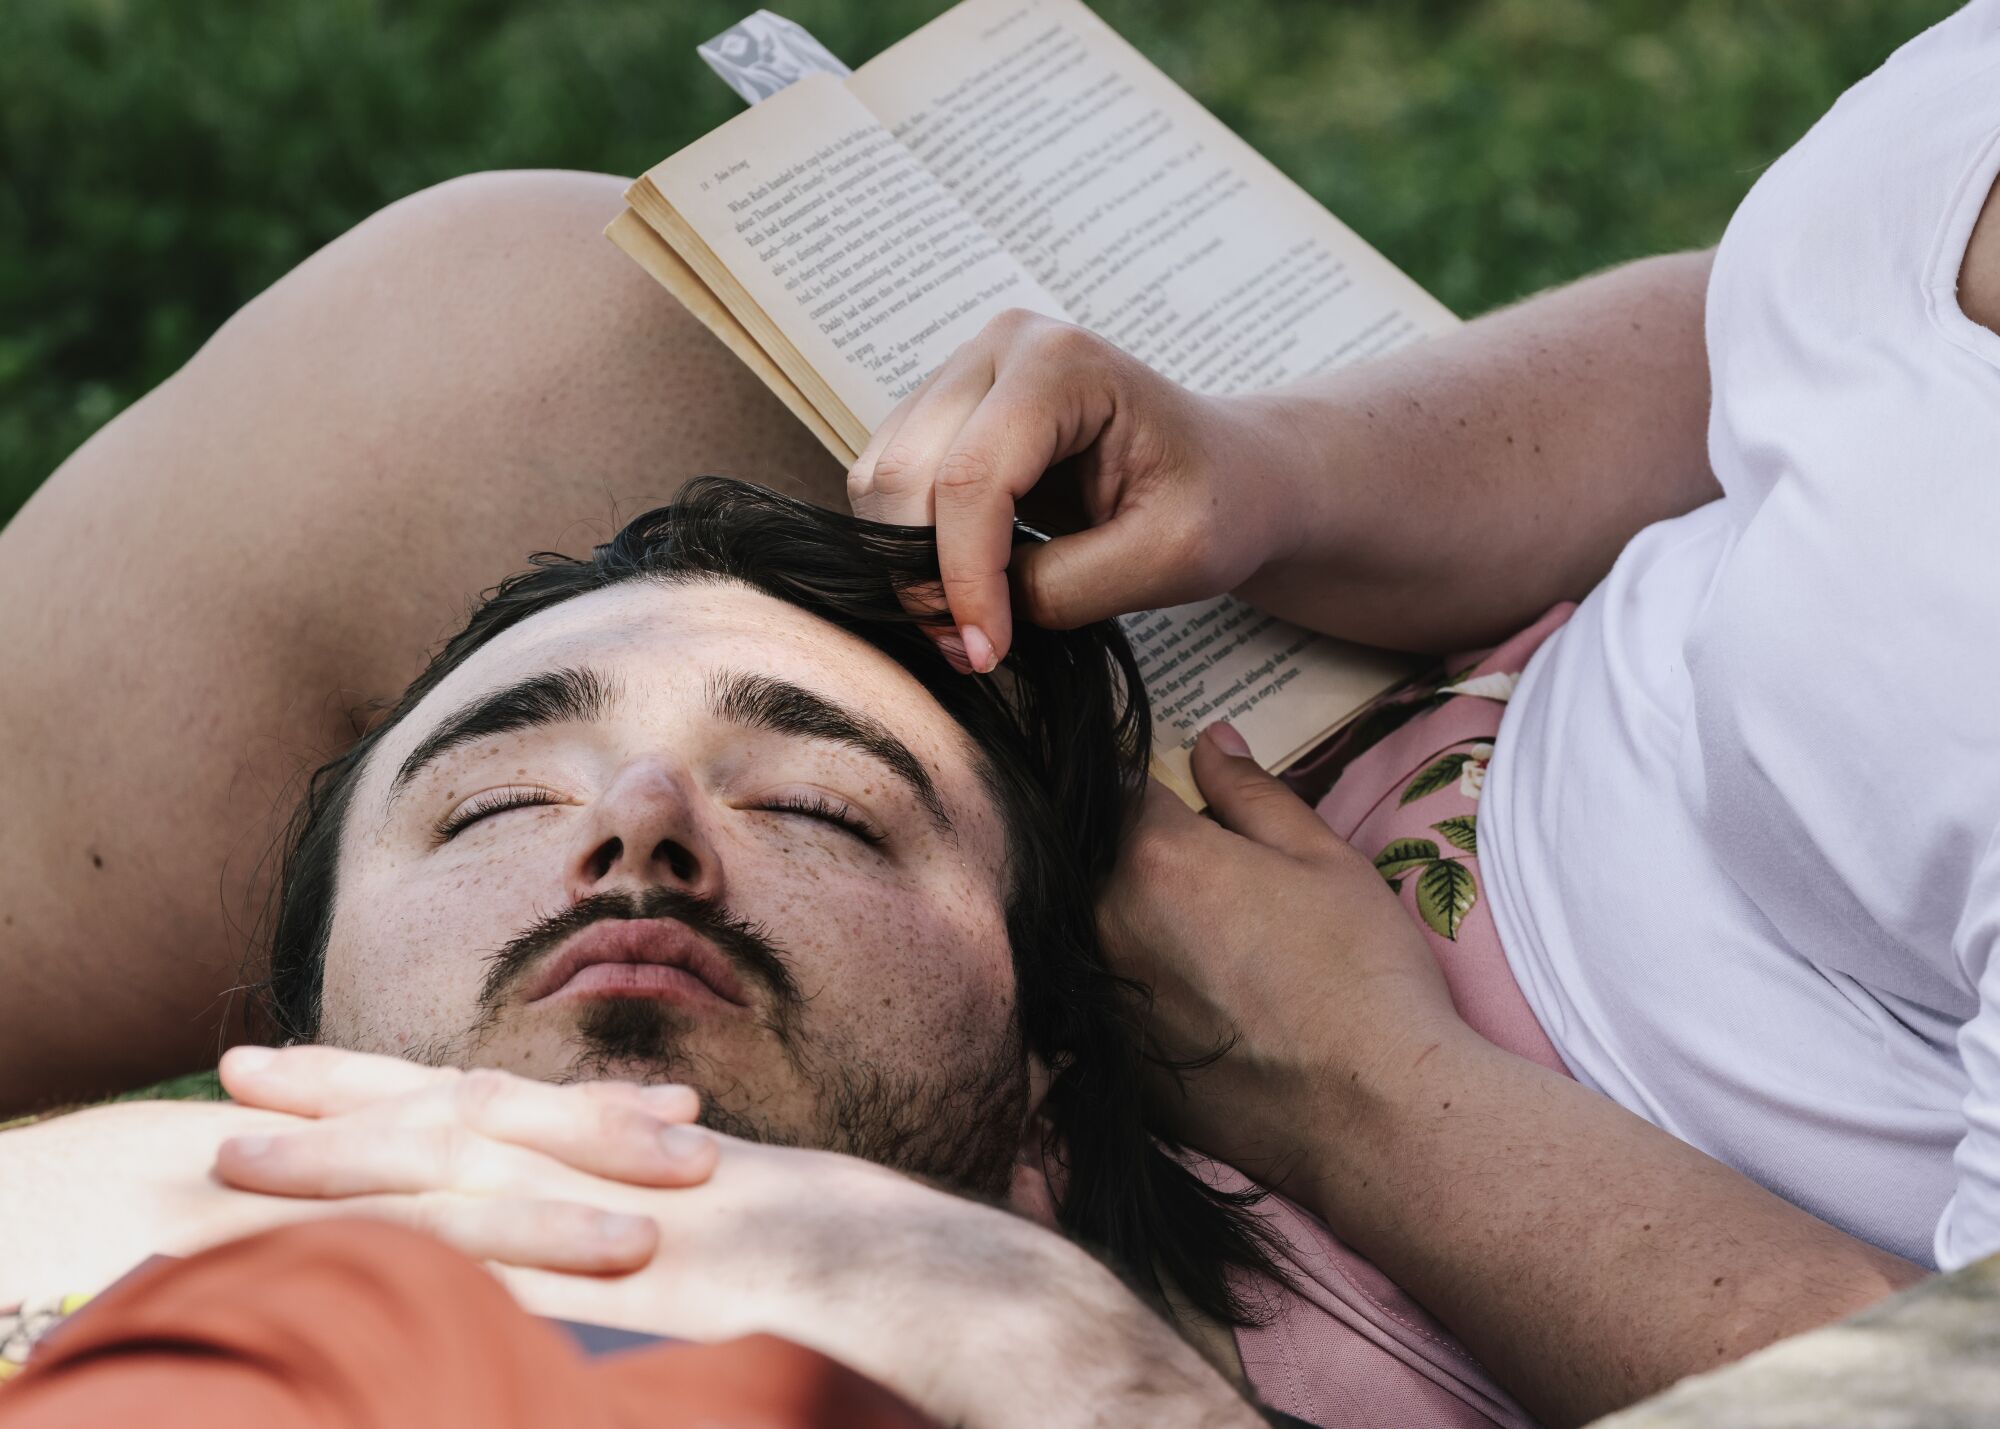 Leaning back, next to an open book, a man rests his head on the lap of another person; his eyes closed.